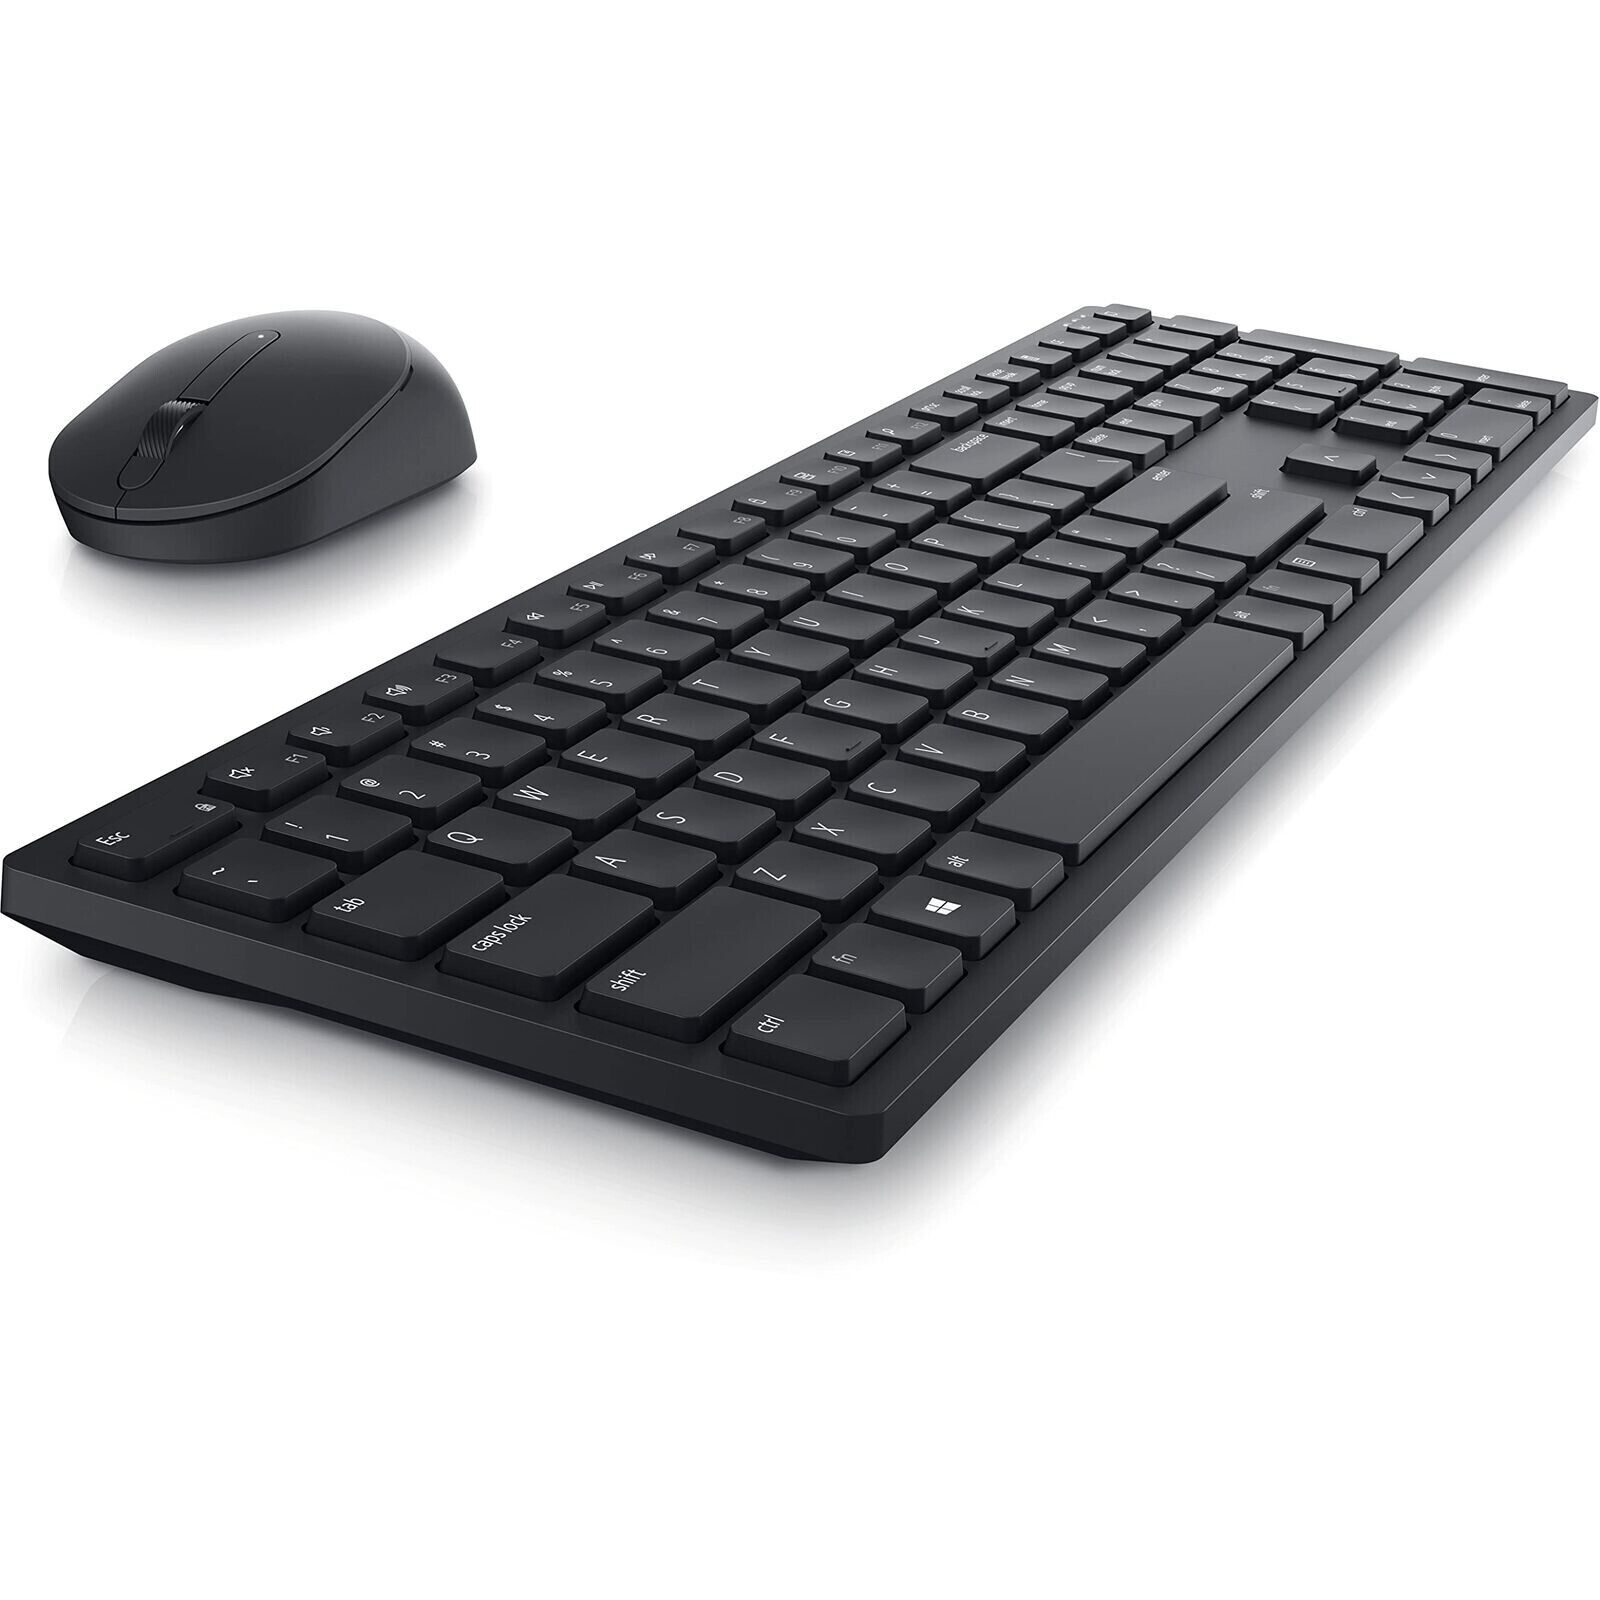 9 Amazing Dell Wireless Keyboard And Mouse for 2023